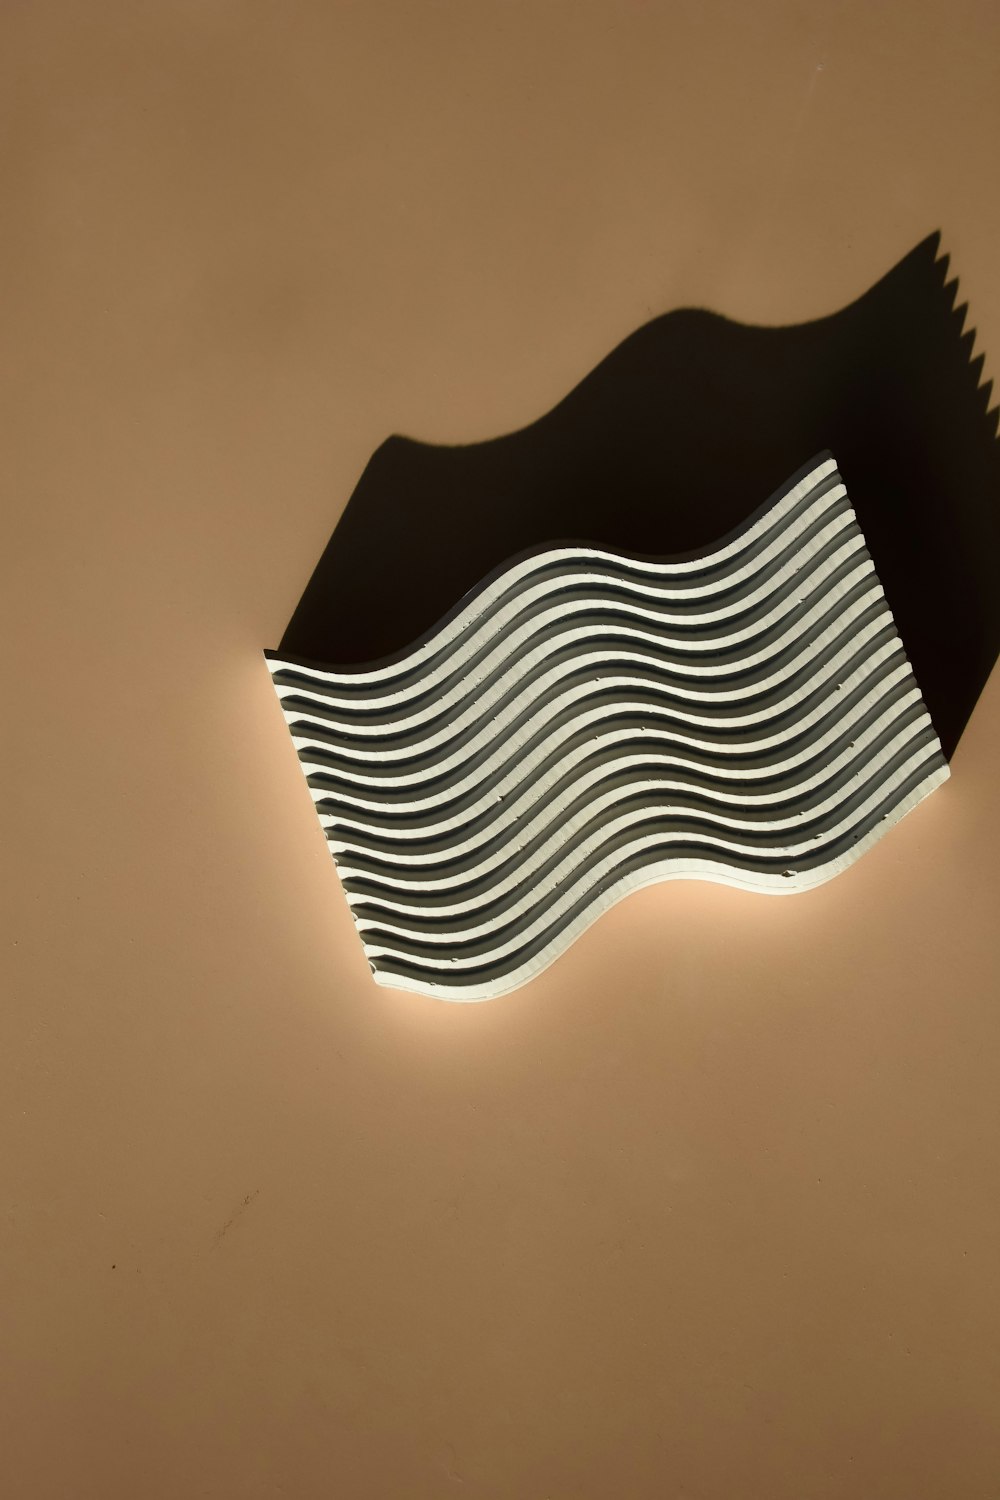 a black and white wave shaped piece of paper